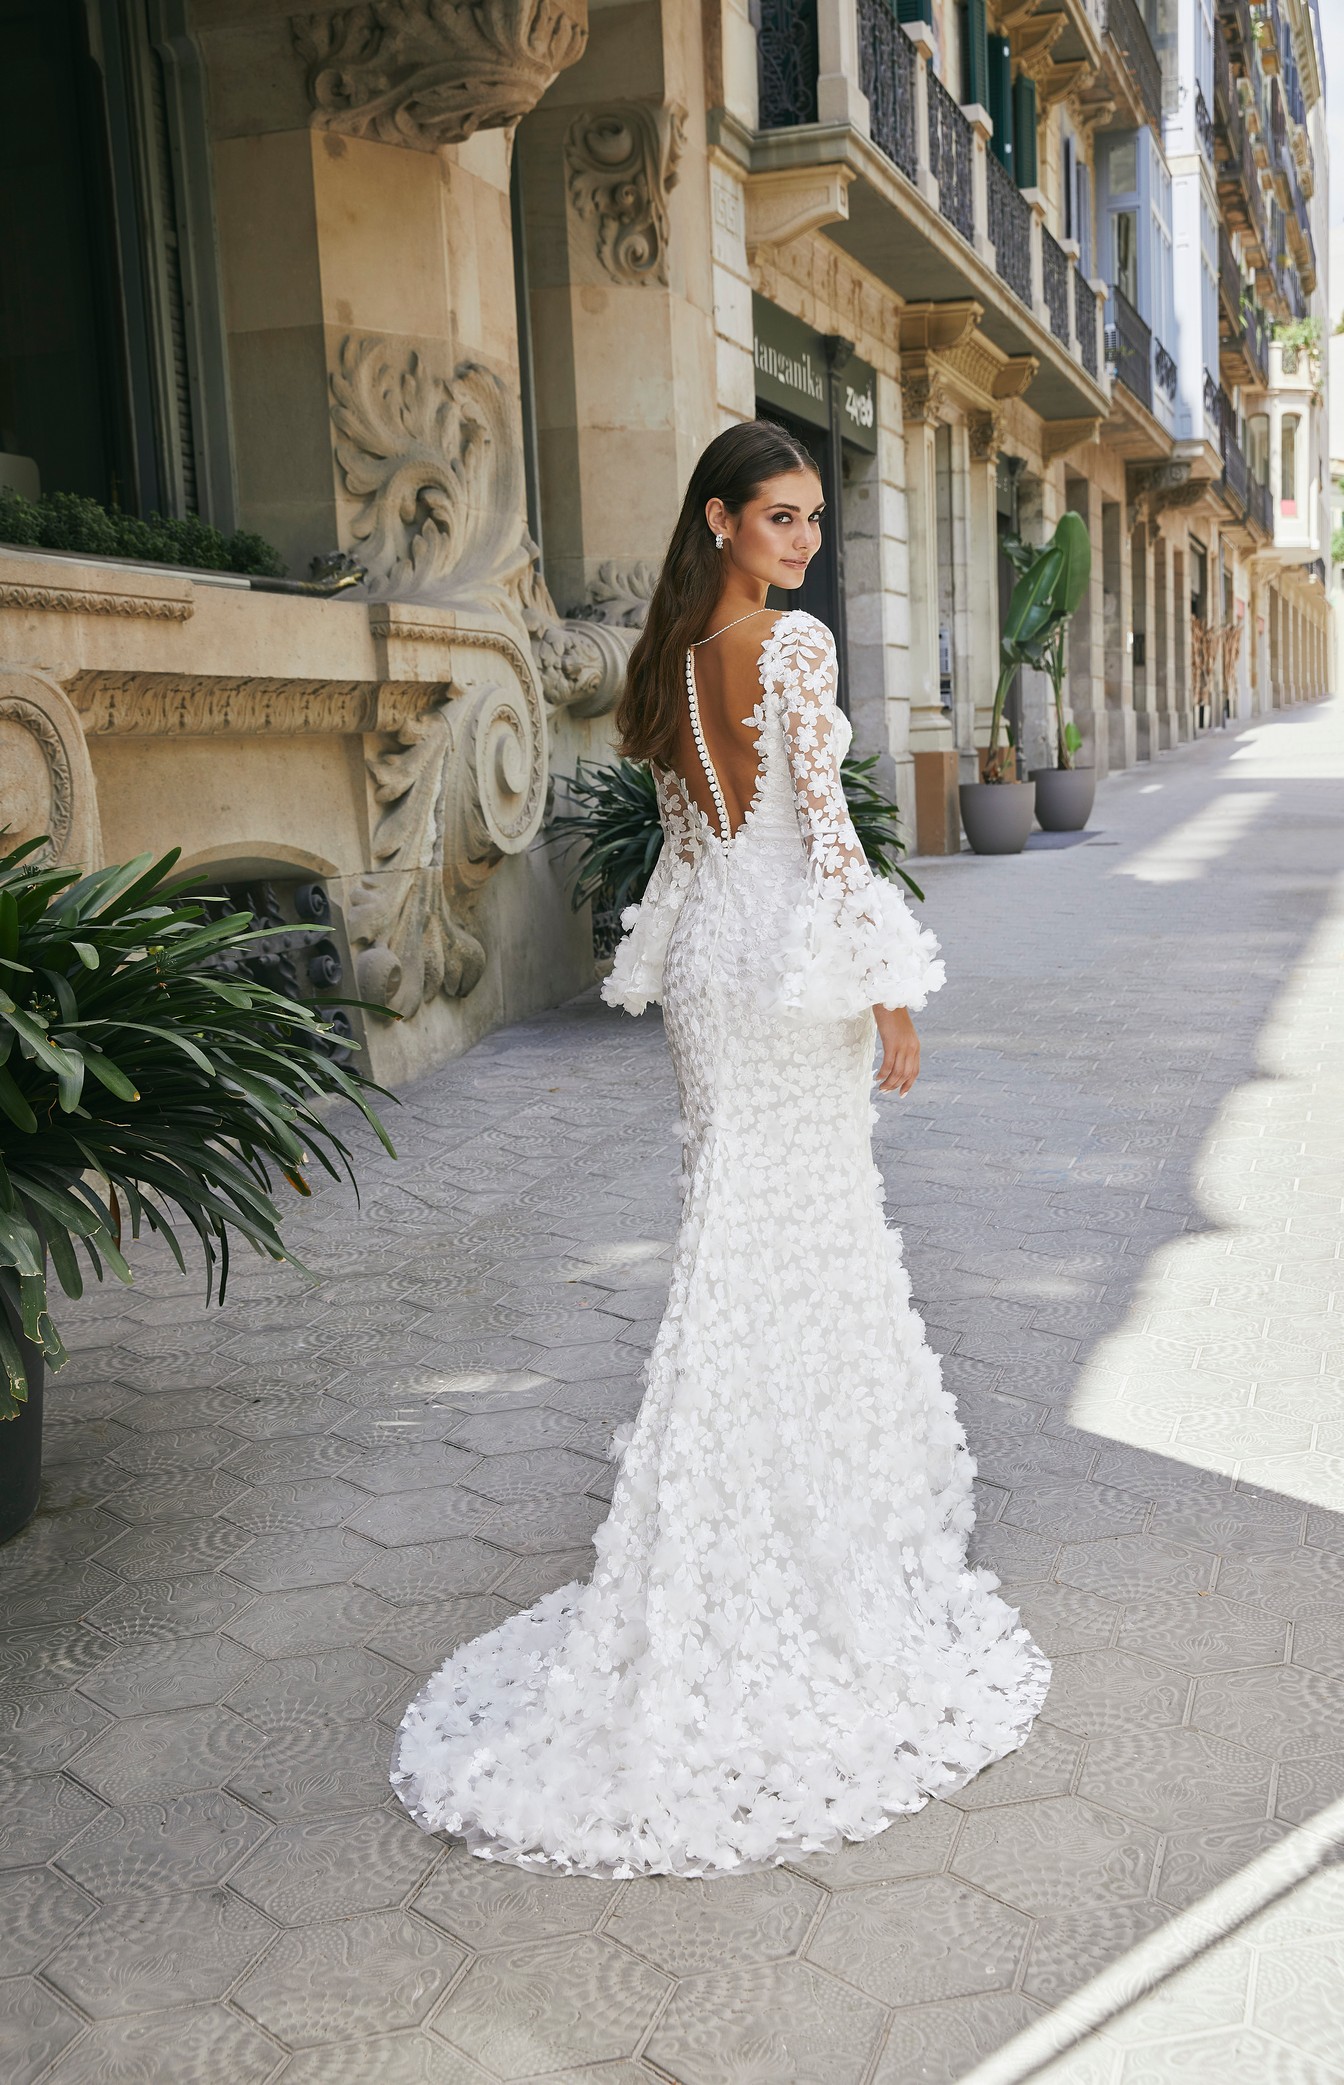 Lady standing on street in Barcelona wearing 3-d floral decorated fit and flare wedding dress